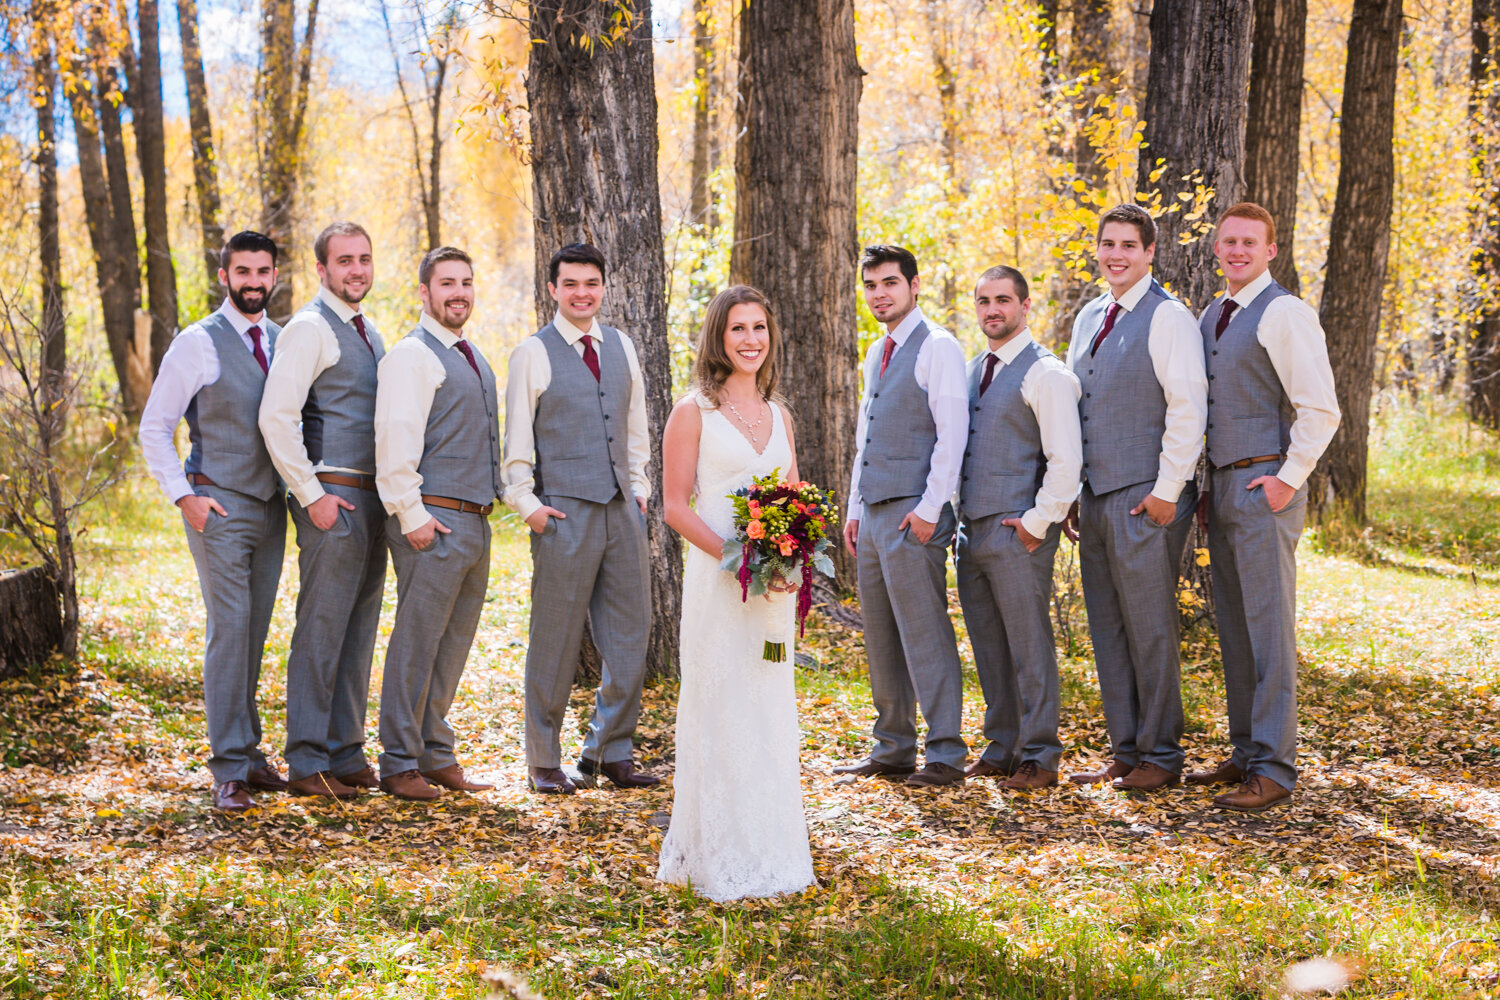  Bridal party for fall wedding by JMGant Photography 